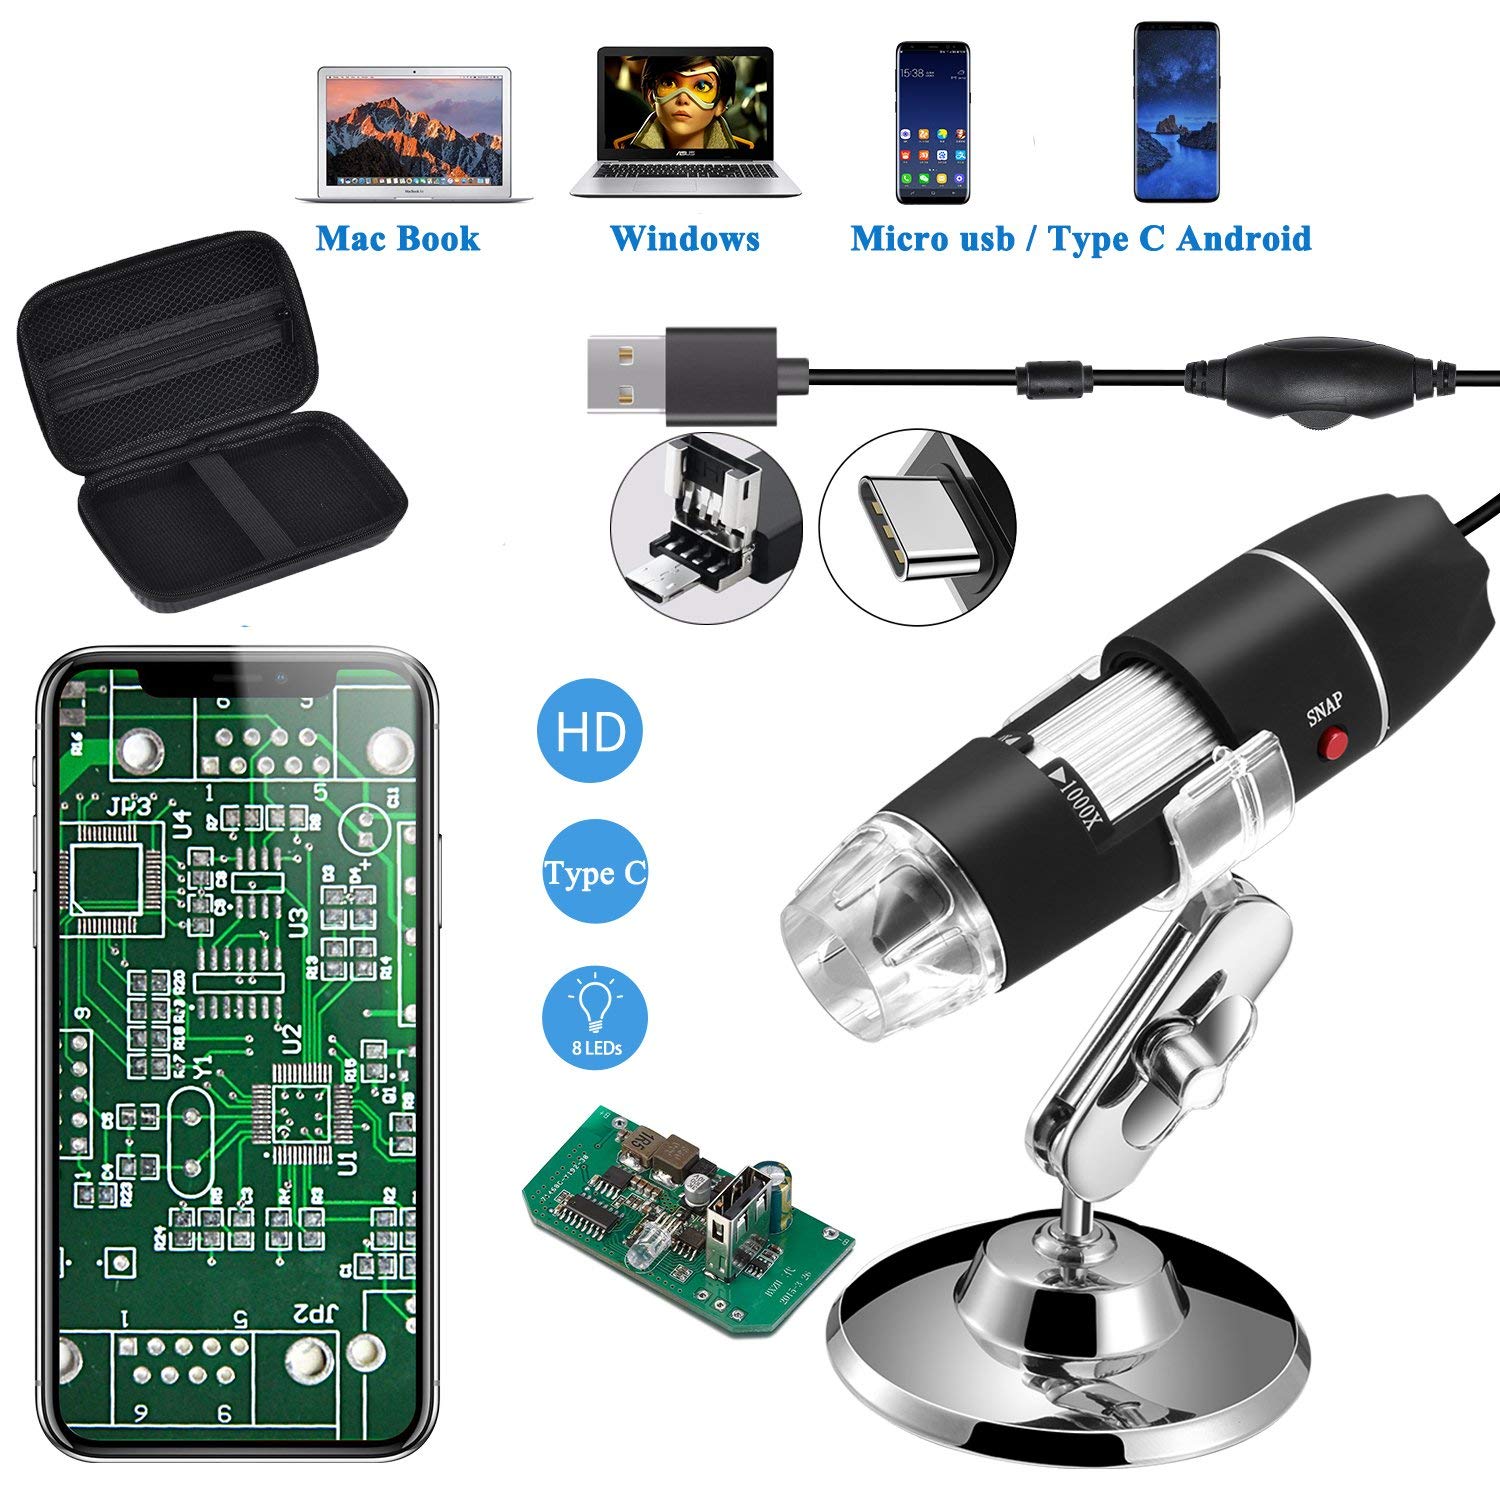 Wireless WiFi Endoscope, Near Focus 1200P HD Endoscope, IP68 Waterproof,  with 8 Adjustable Leds and 5M Semi-Rigid Cable, Suitable for iOS, Android -  KENTFAITH